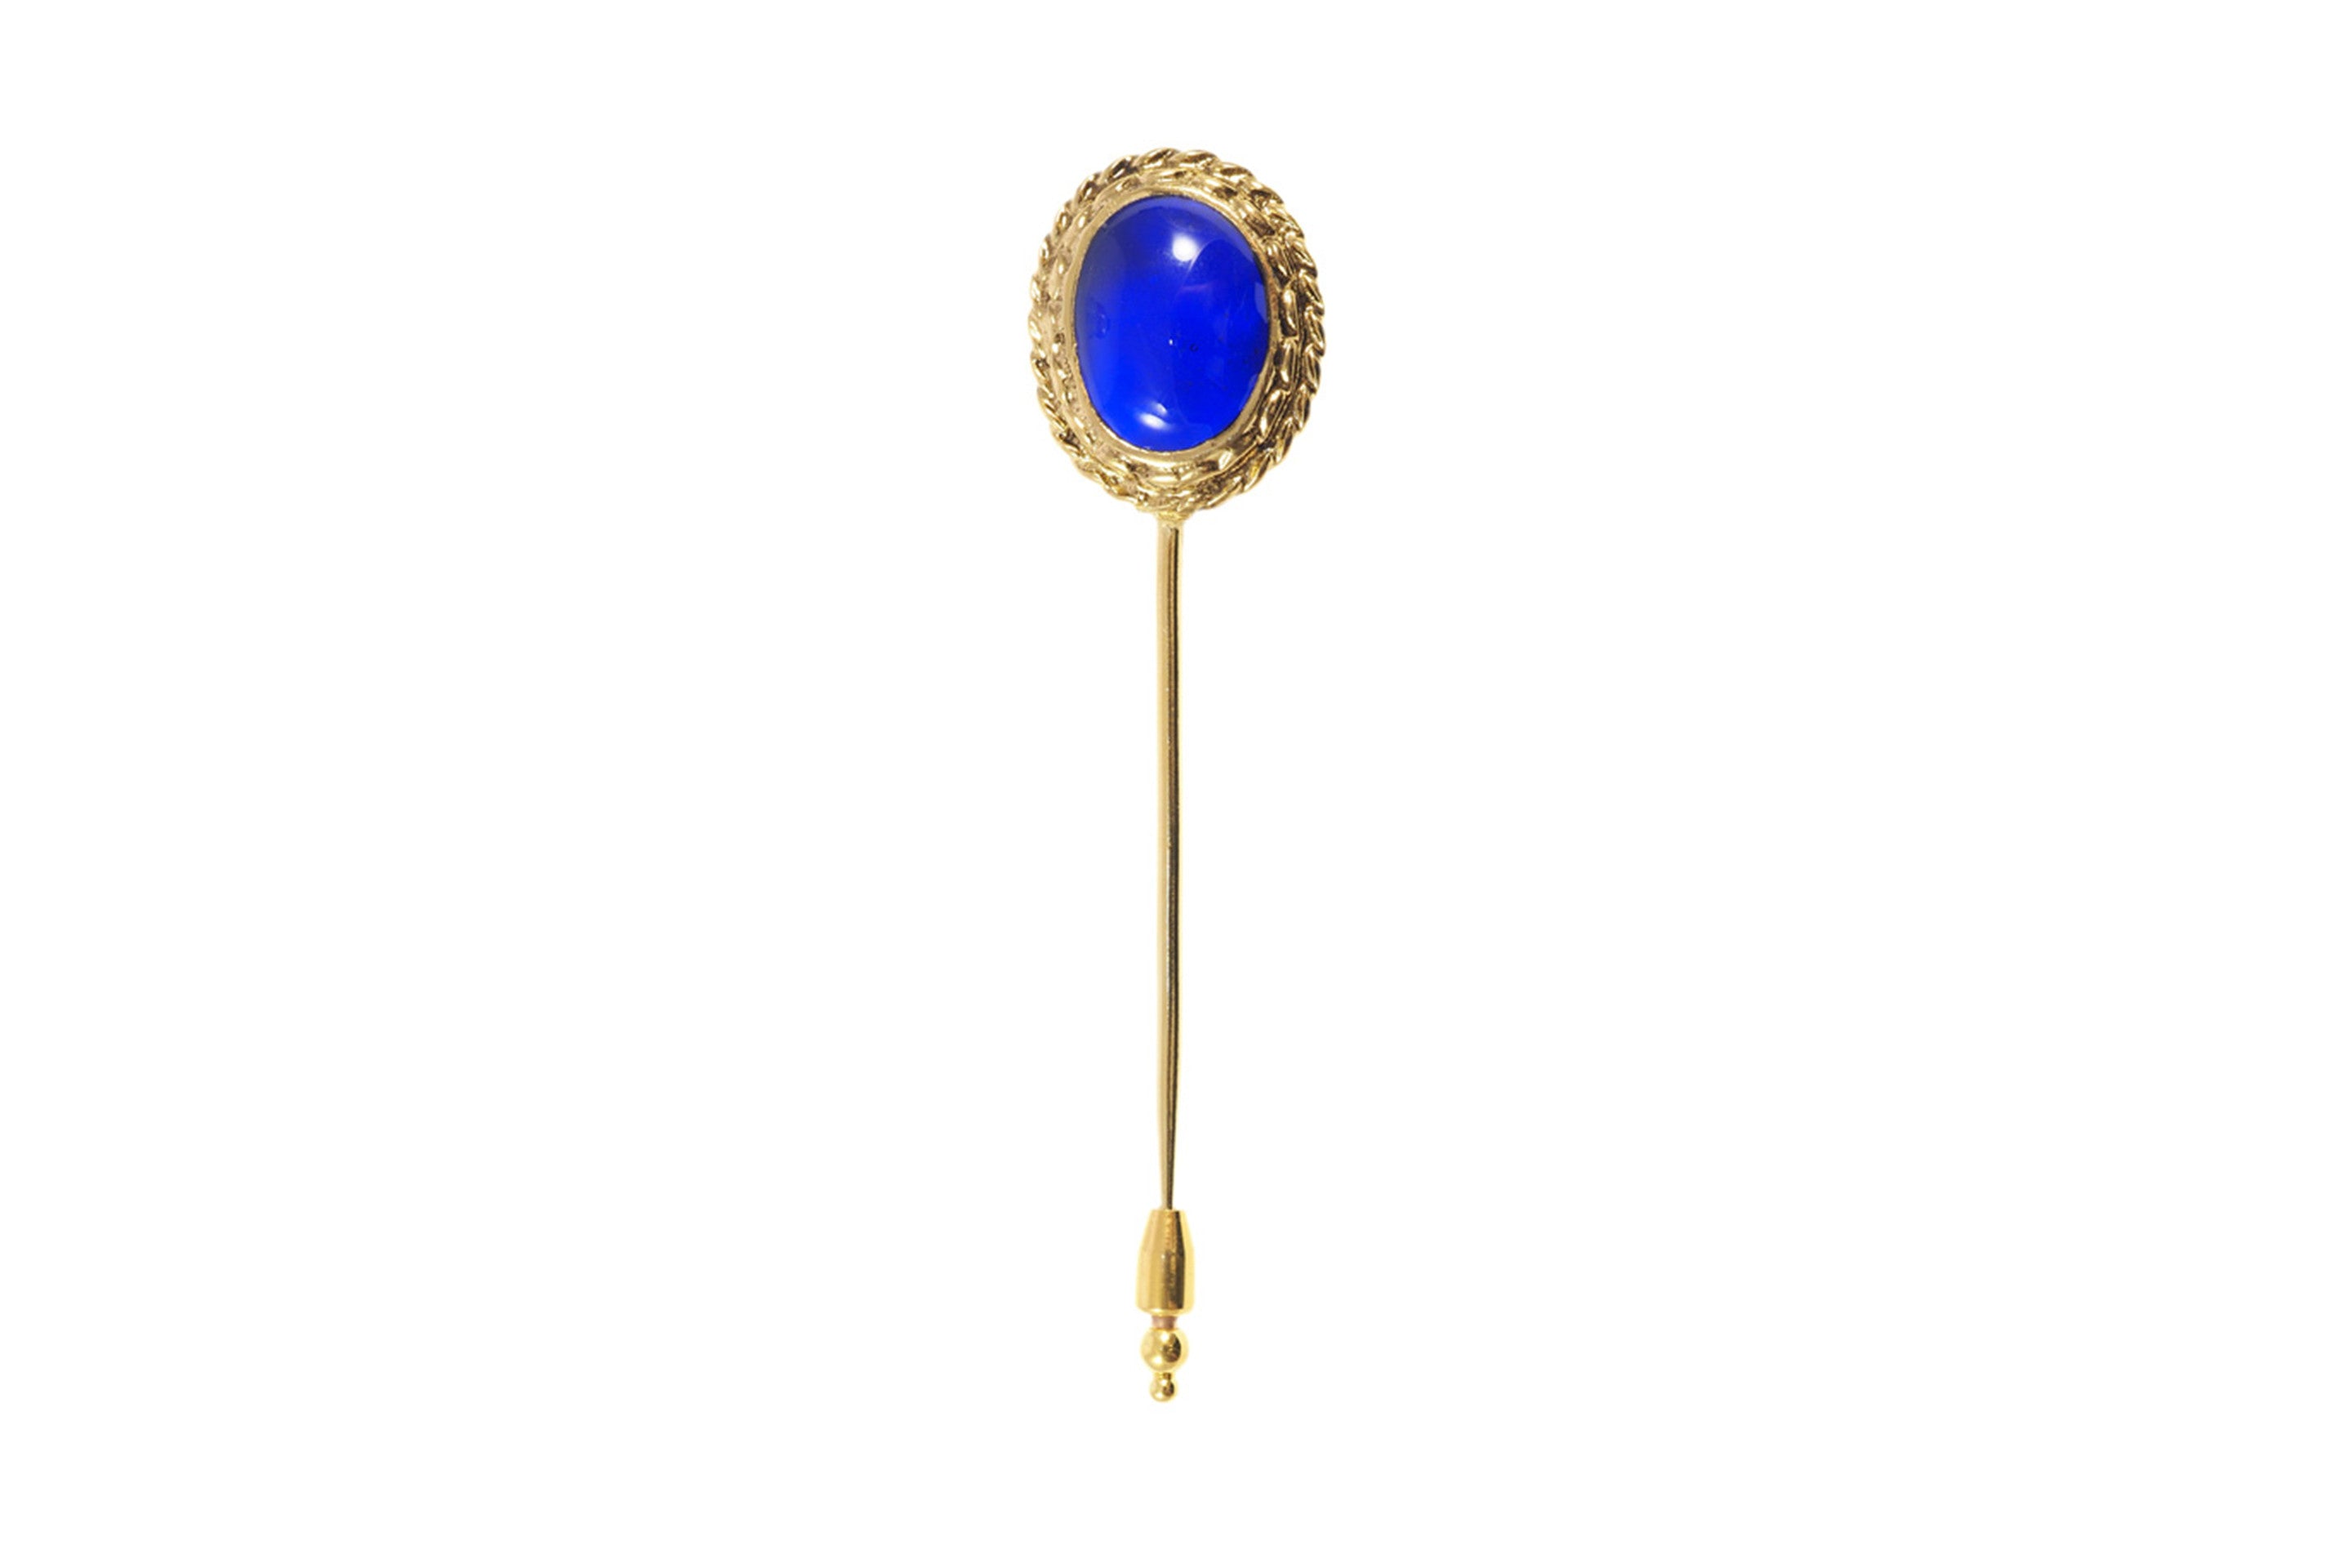 Chevaliere Oval Pin